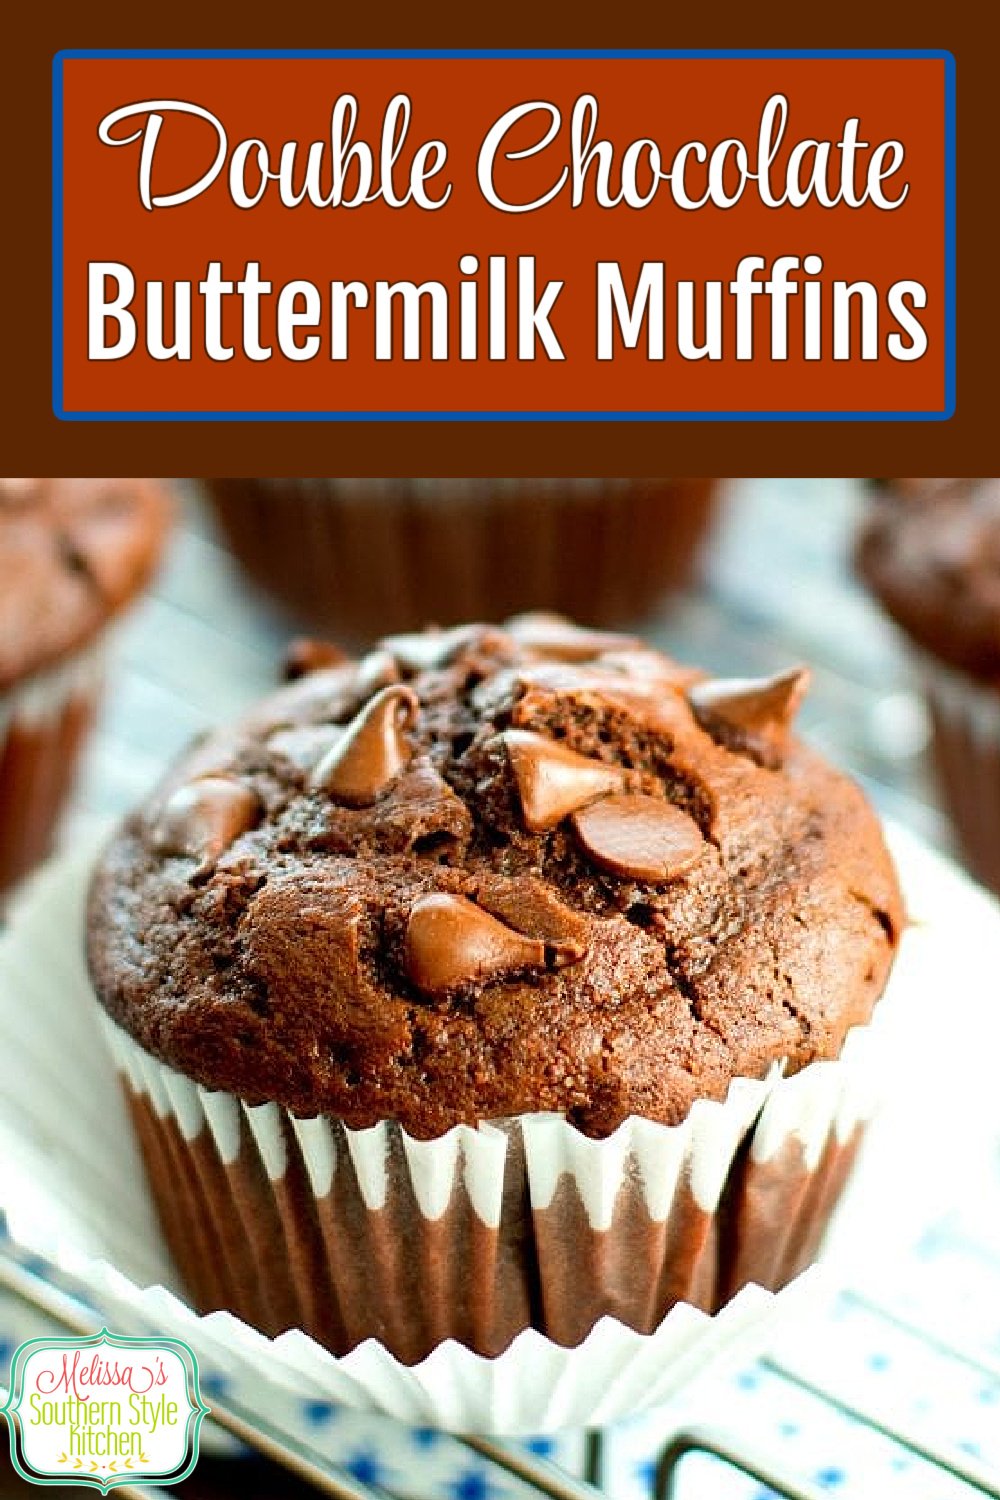 Treat yourself to a batch of these Double Chocolate Buttermilk Muffins #chocolatemuffins #chocolatedhipmuffins #doublechocolatemuffins #muffins #mujffinrecipes #brunch #breakfast #southernrecipes #southernfood #desserts #dessertfoodrecipes via @melissasssk